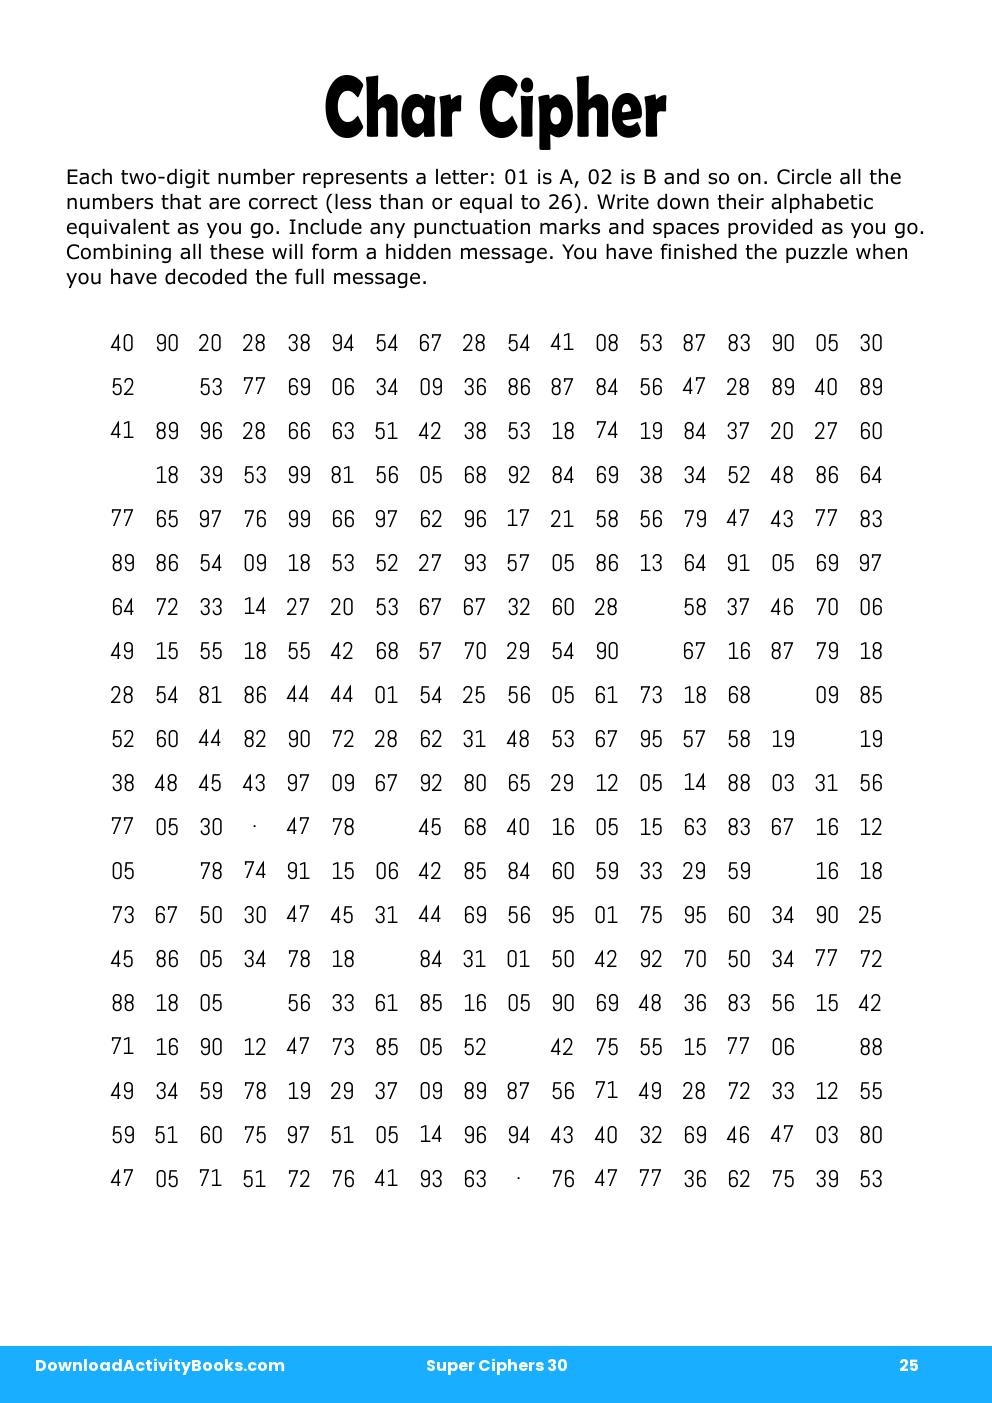 Char Cipher in Super Ciphers 30